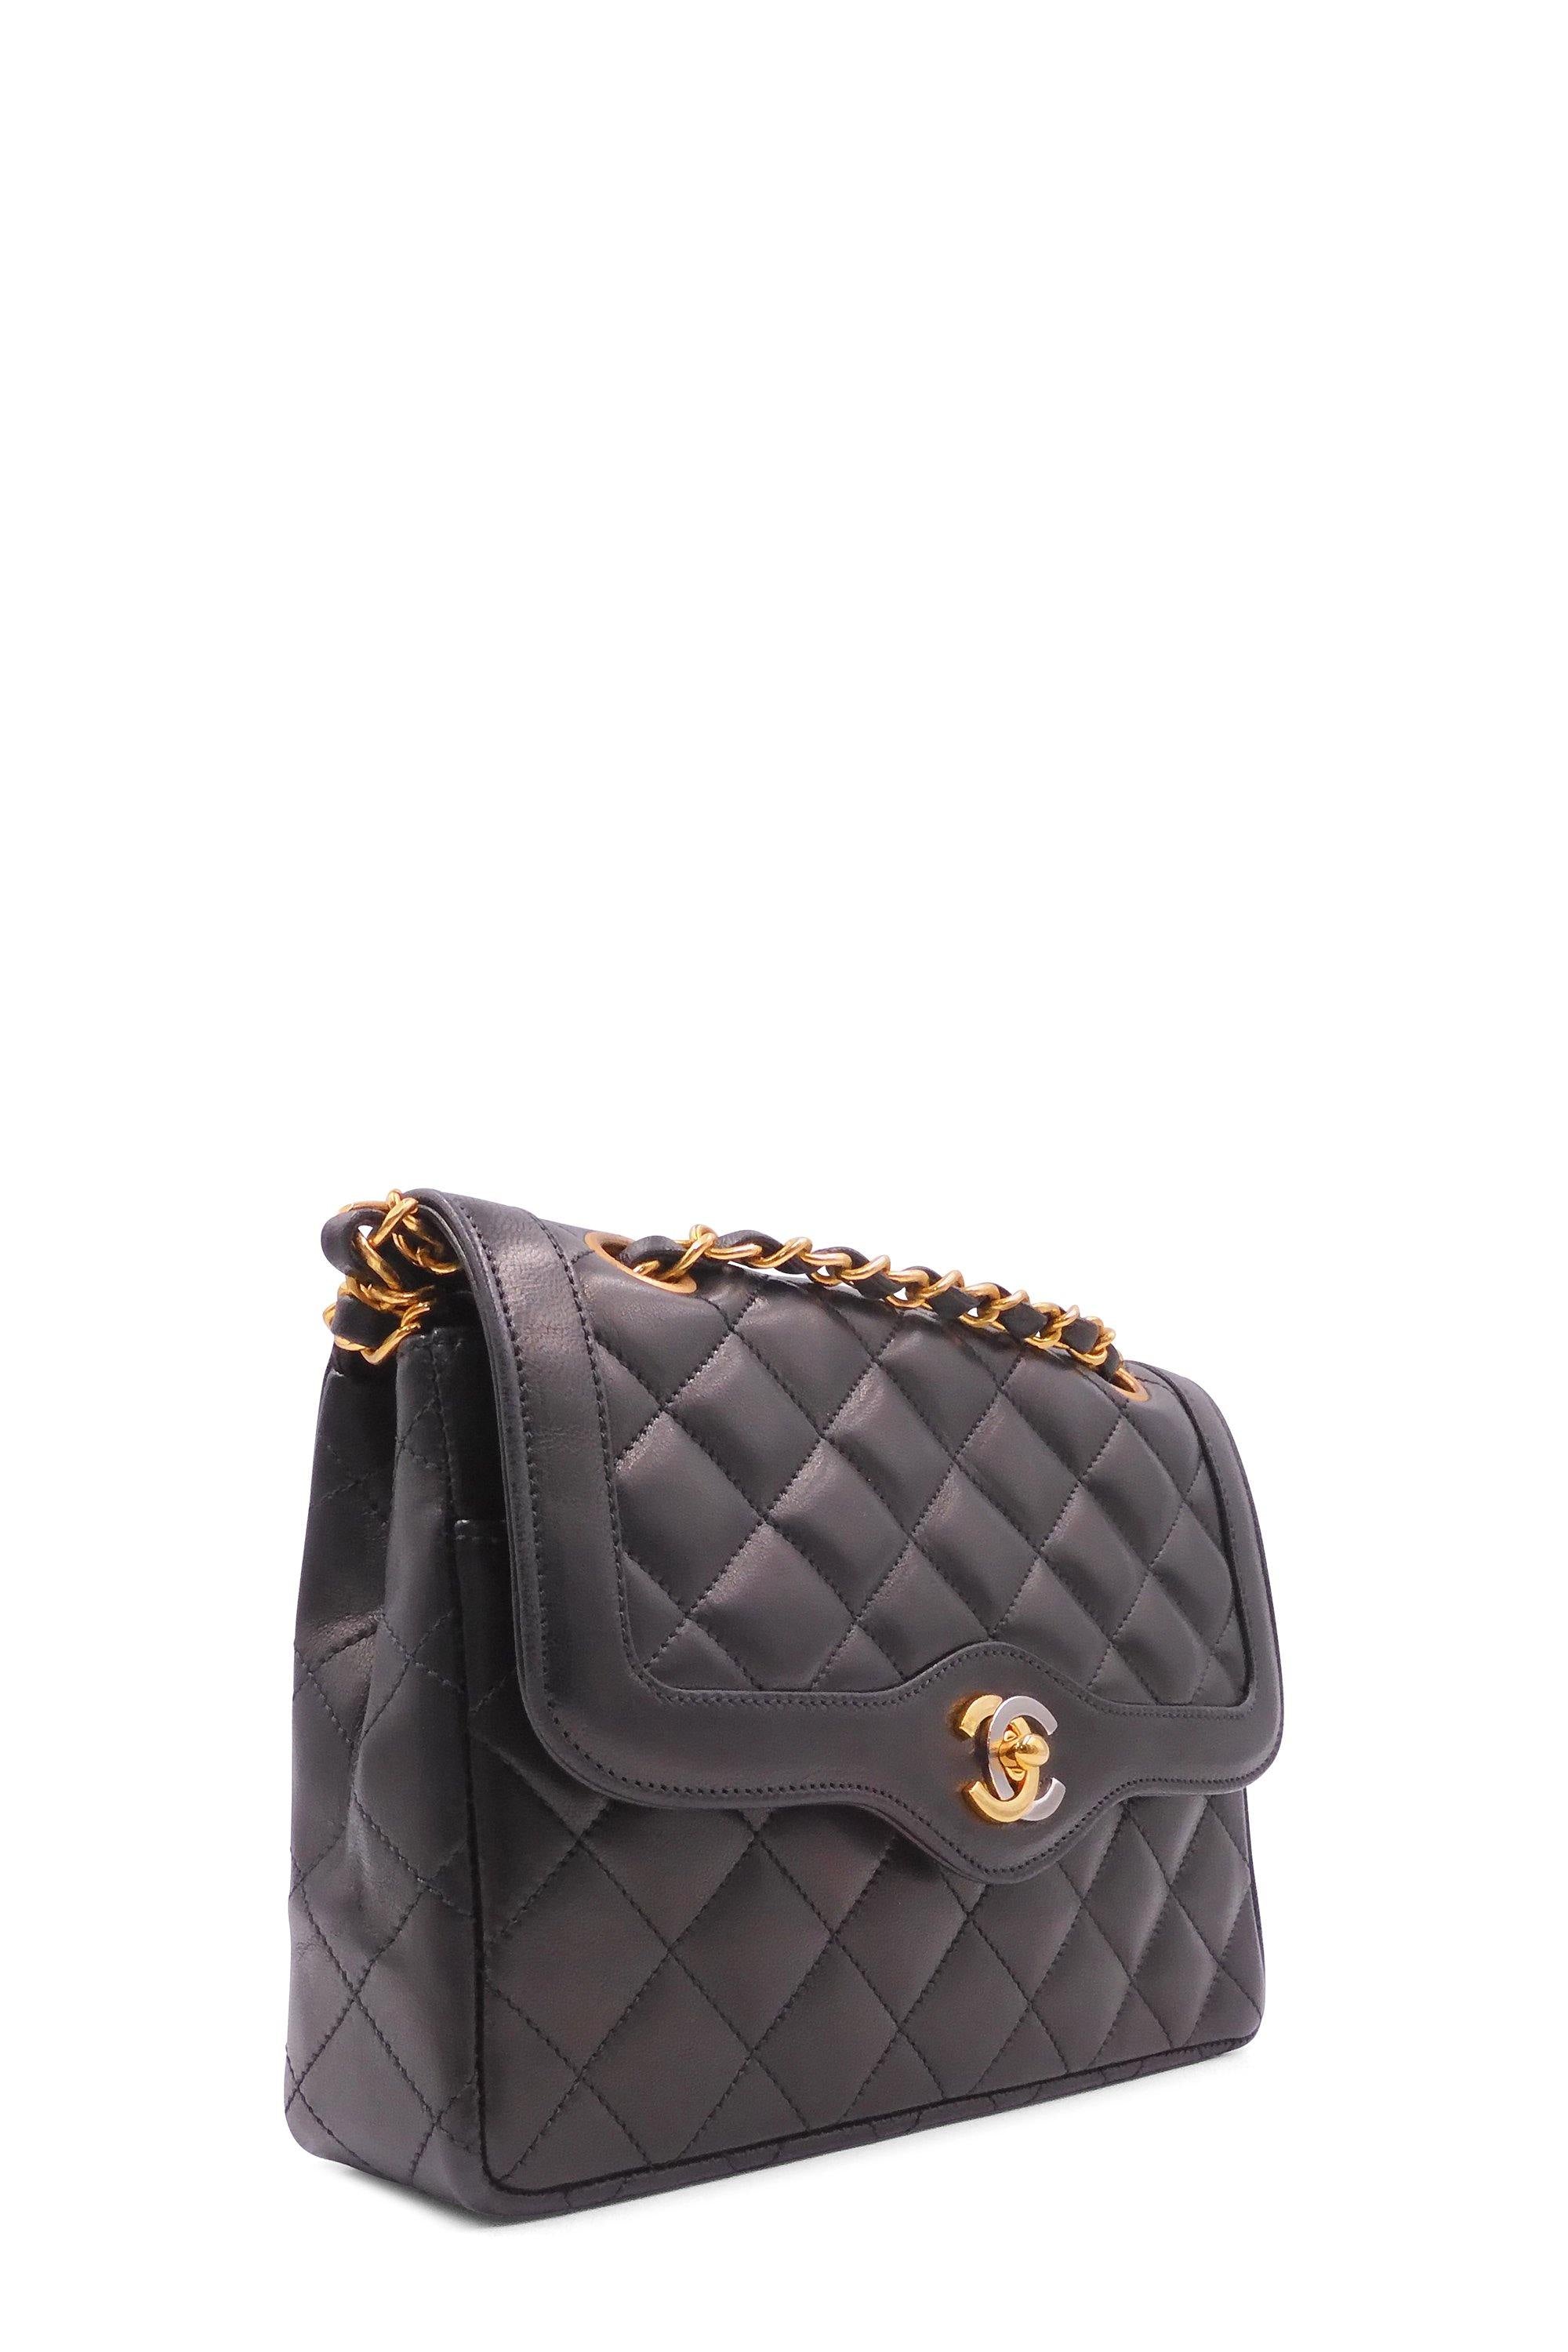 Chanel Purse – Turnabout Luxury Resale